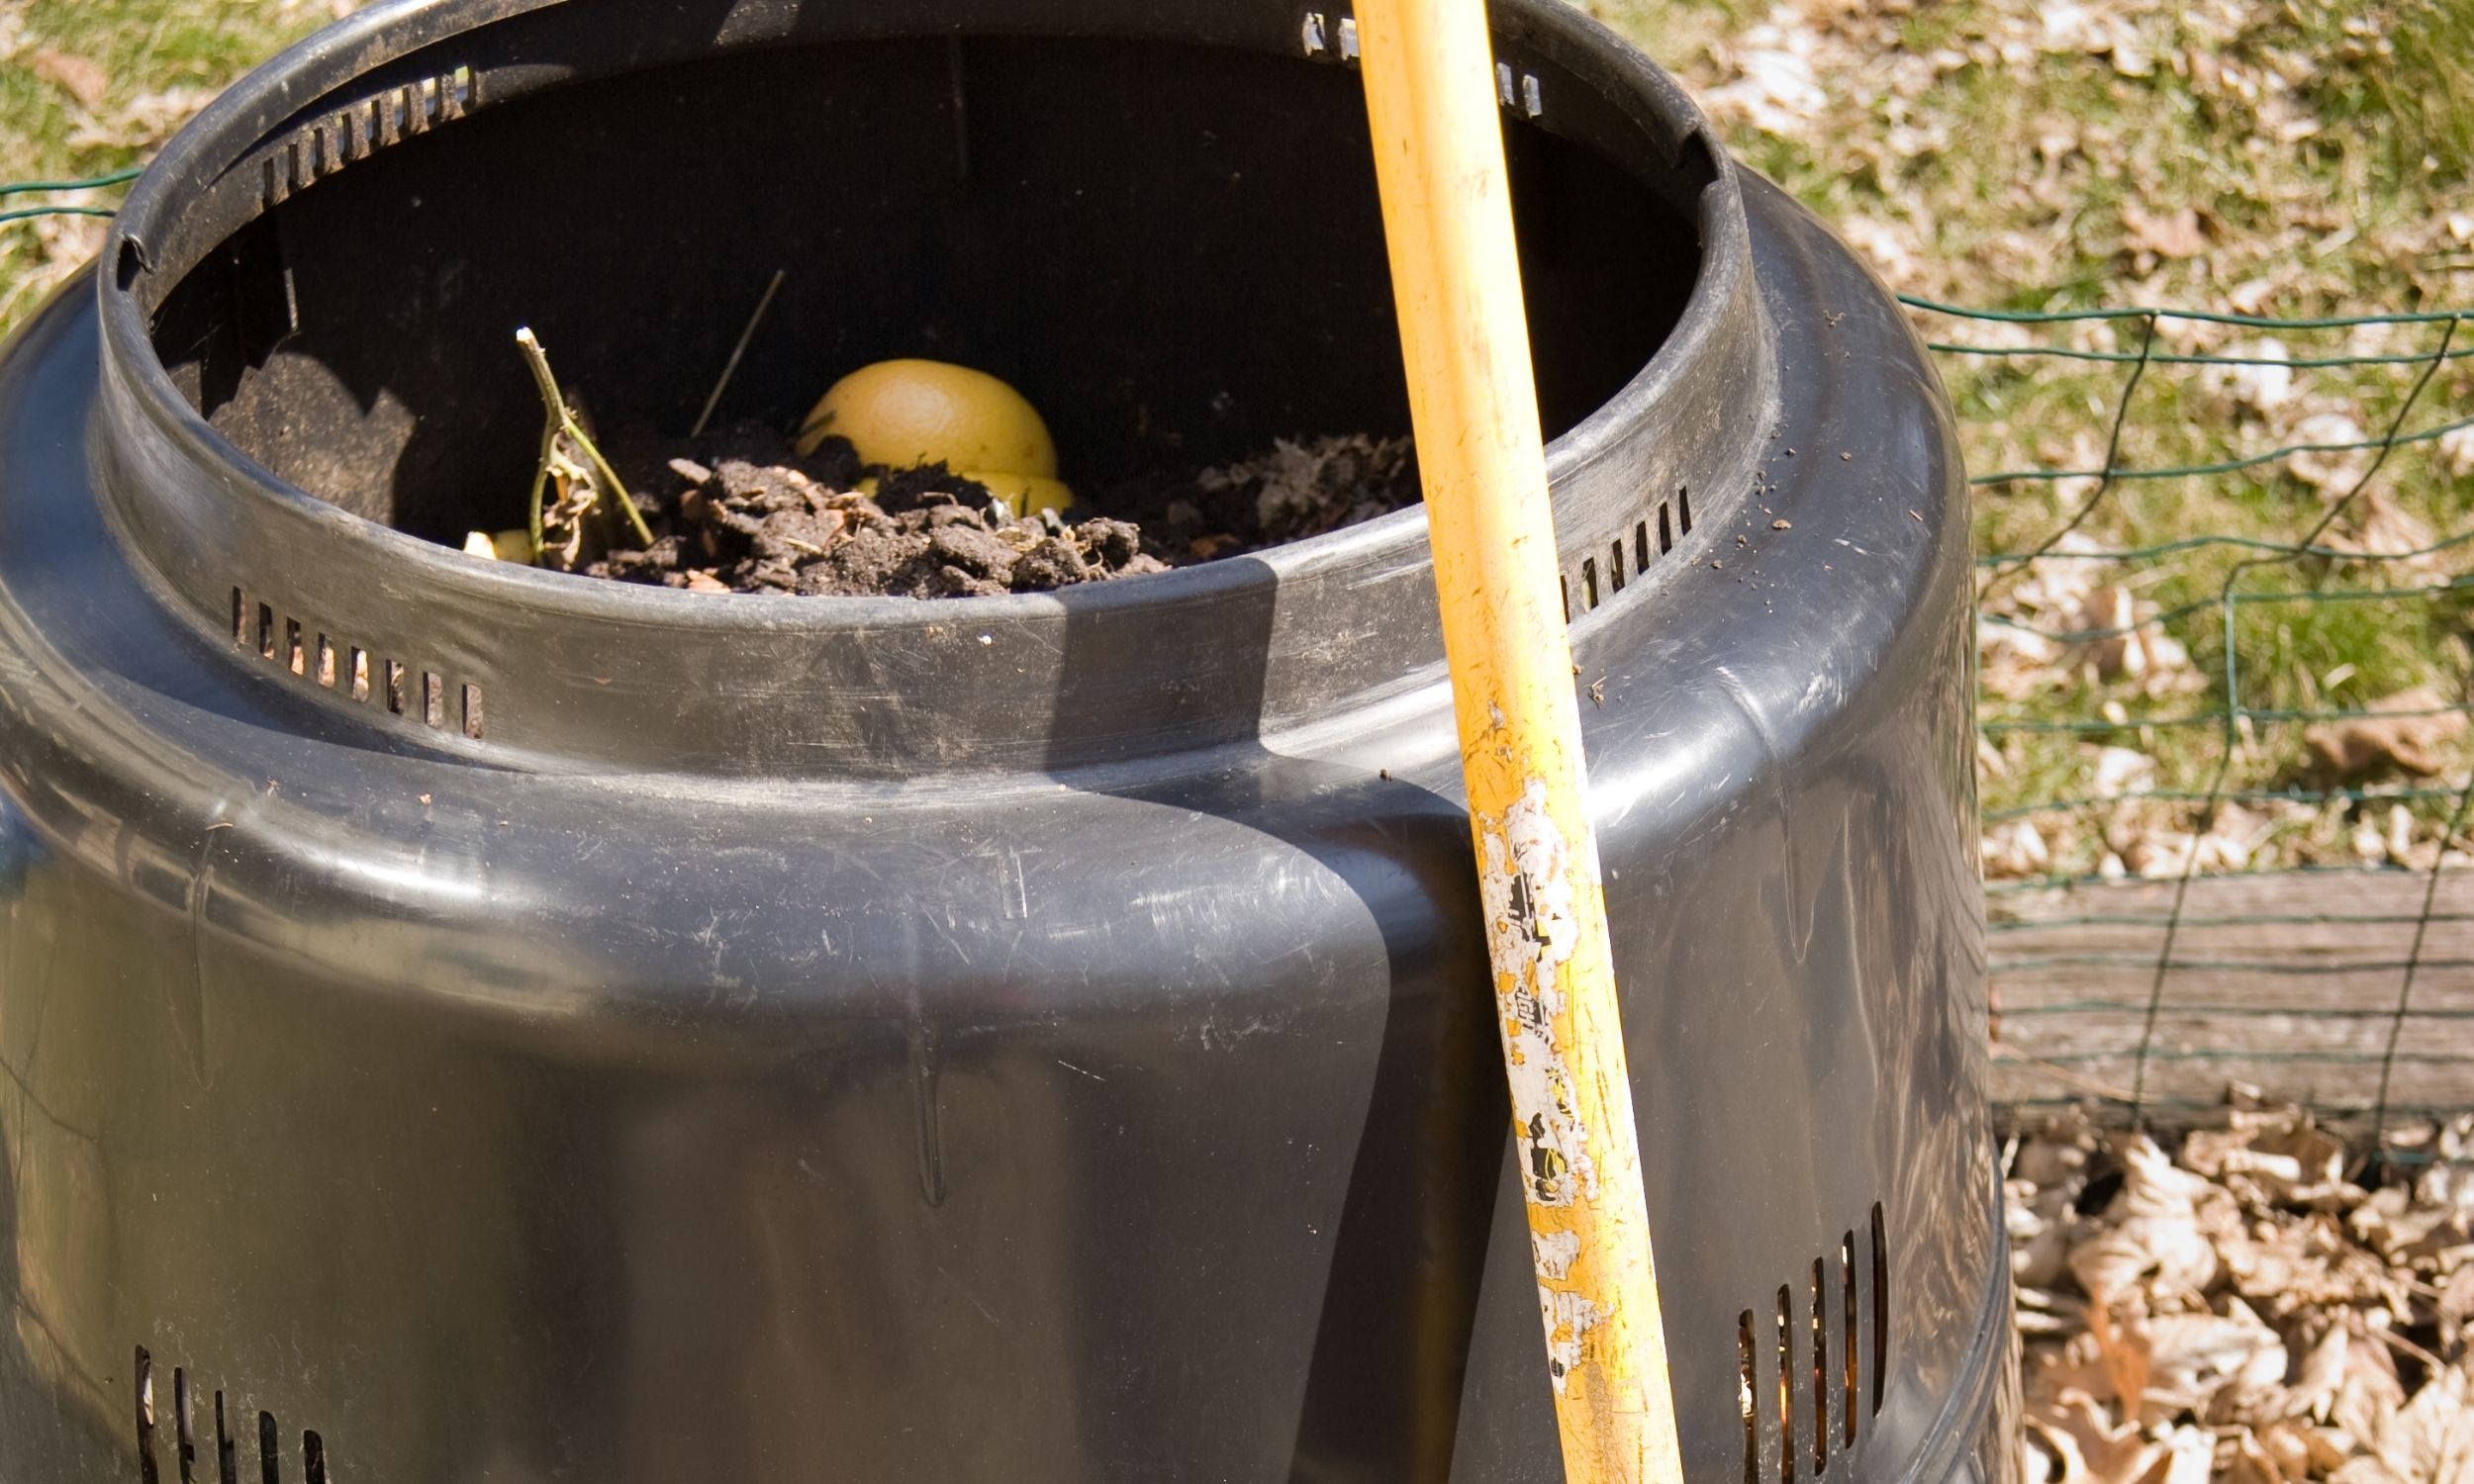 Composting Tumbler Tips: How to Optimize Your Composting Process